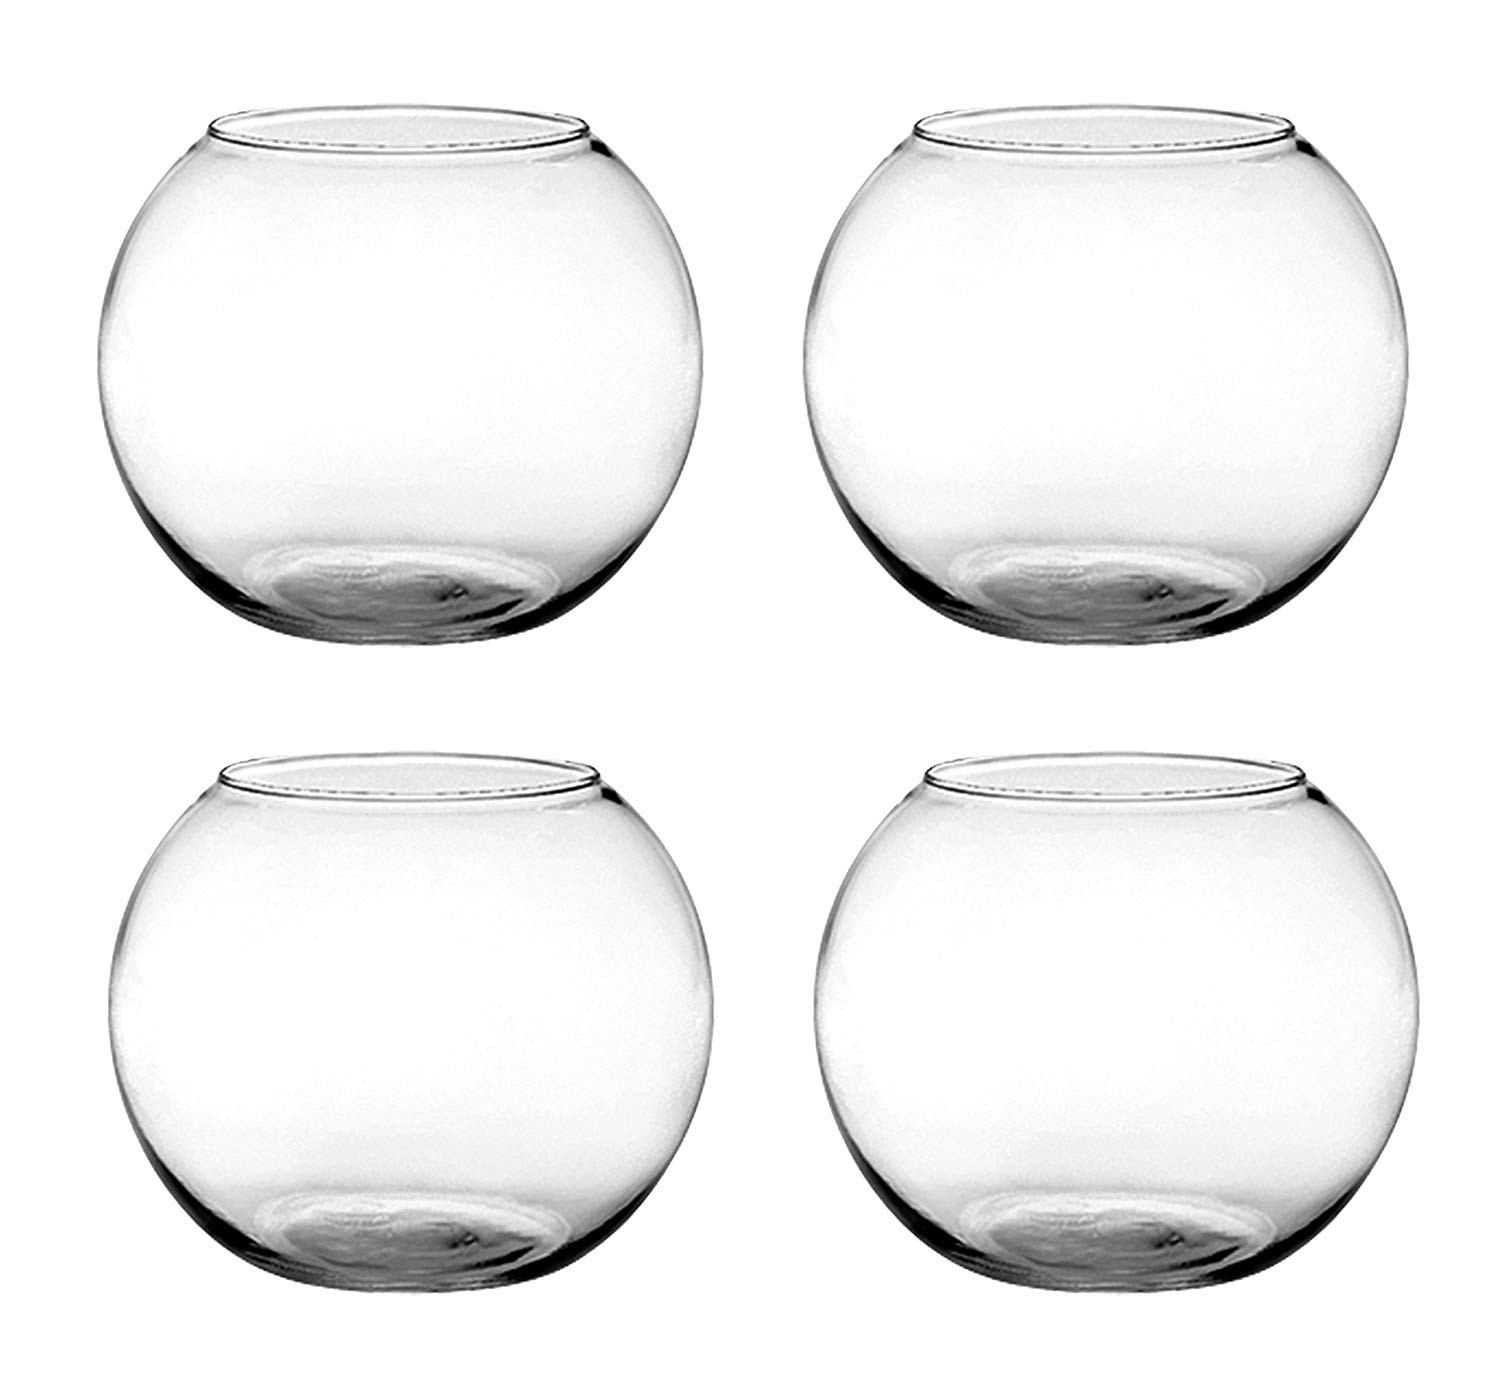 21 Lovable Vintage Glass Bud Vases 2024 free download vintage glass bud vases of amazon com set of 4 syndicate sales 6 inches clear rose bowl for amazon com set of 4 syndicate sales 6 inches clear rose bowl bundled by maven gifts garden outdoor